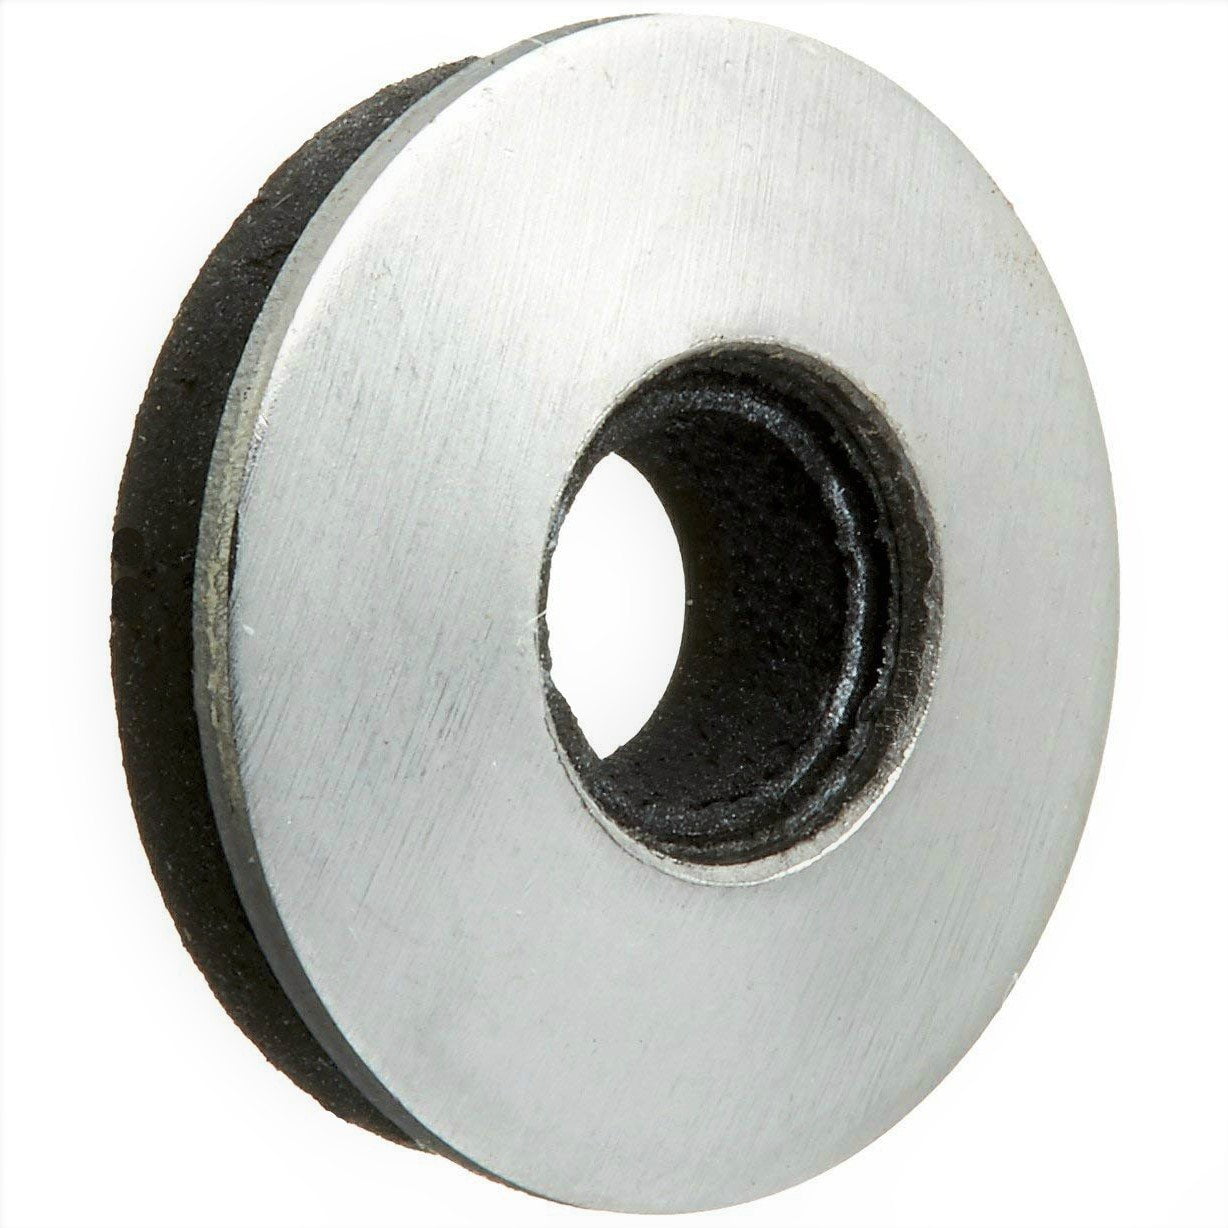 BCP697 1000 Qty #6 Stainless Steel EPDM Bonded Sealing Neoprene Rubber Washers 